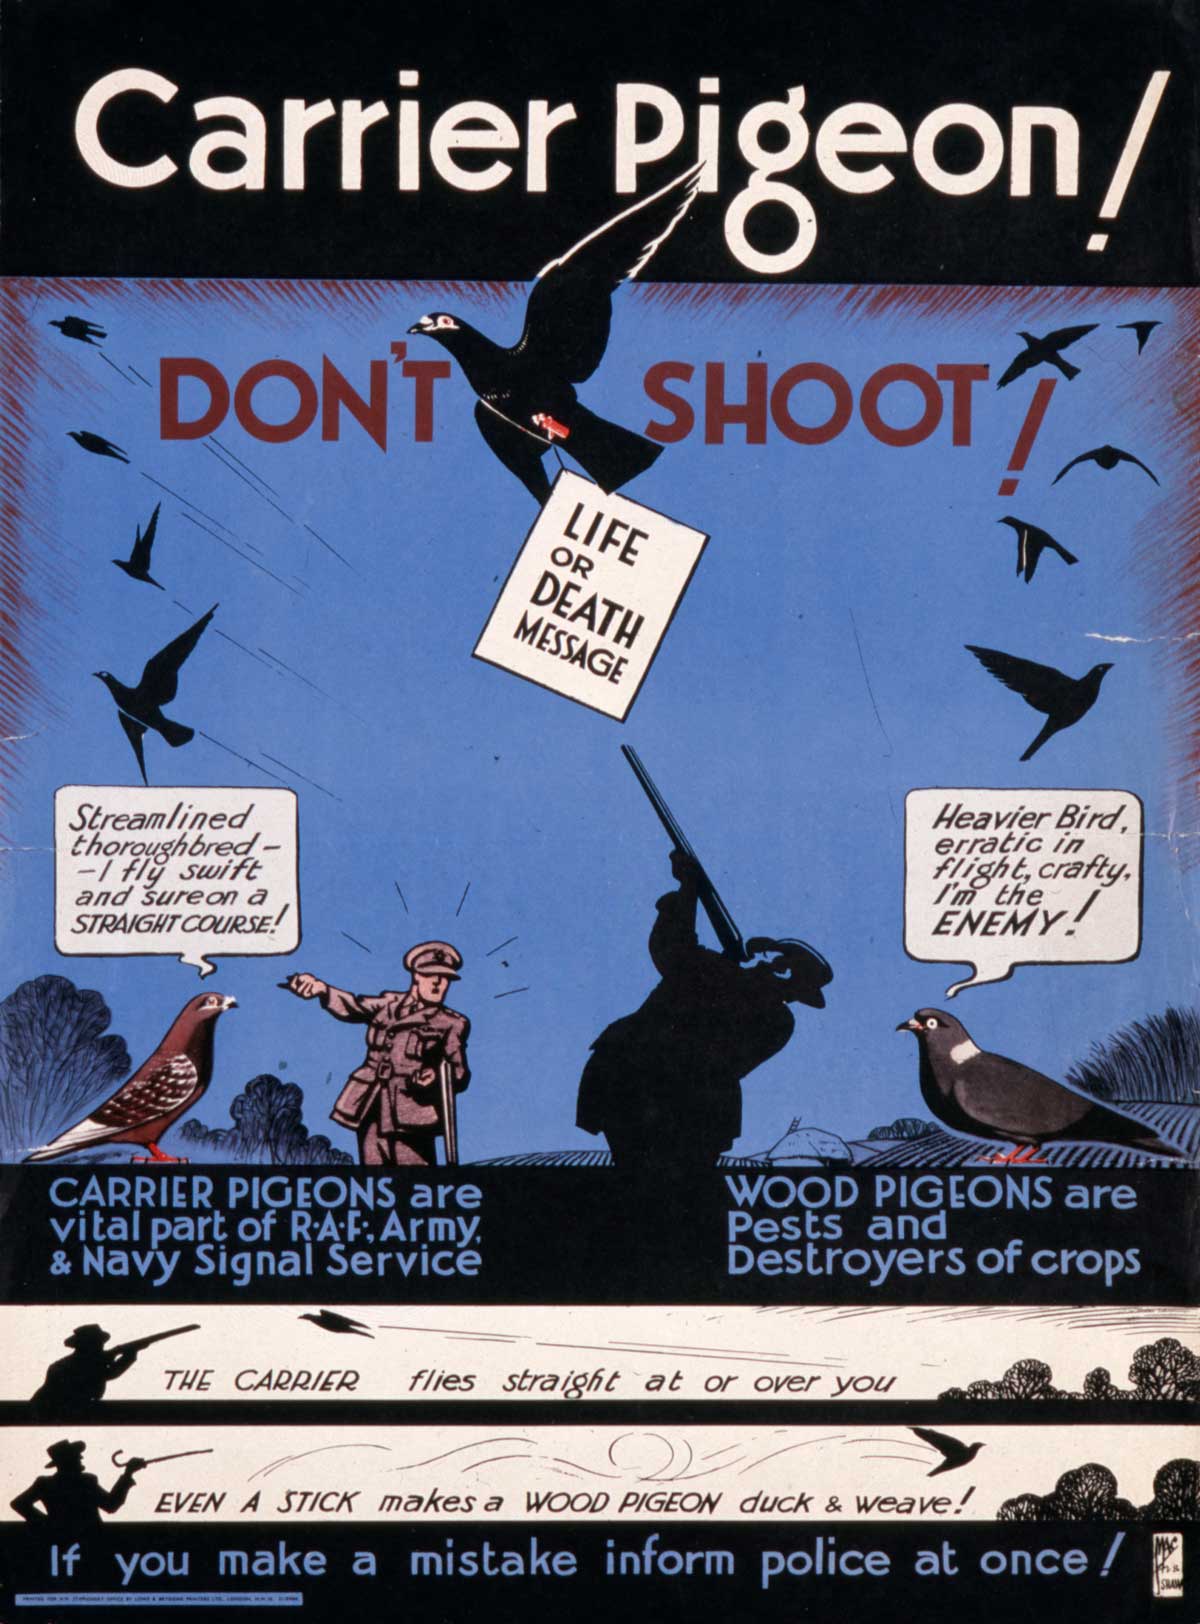 wartime poster warning people of the dangers of shooting carrier pigeons, 1940s.